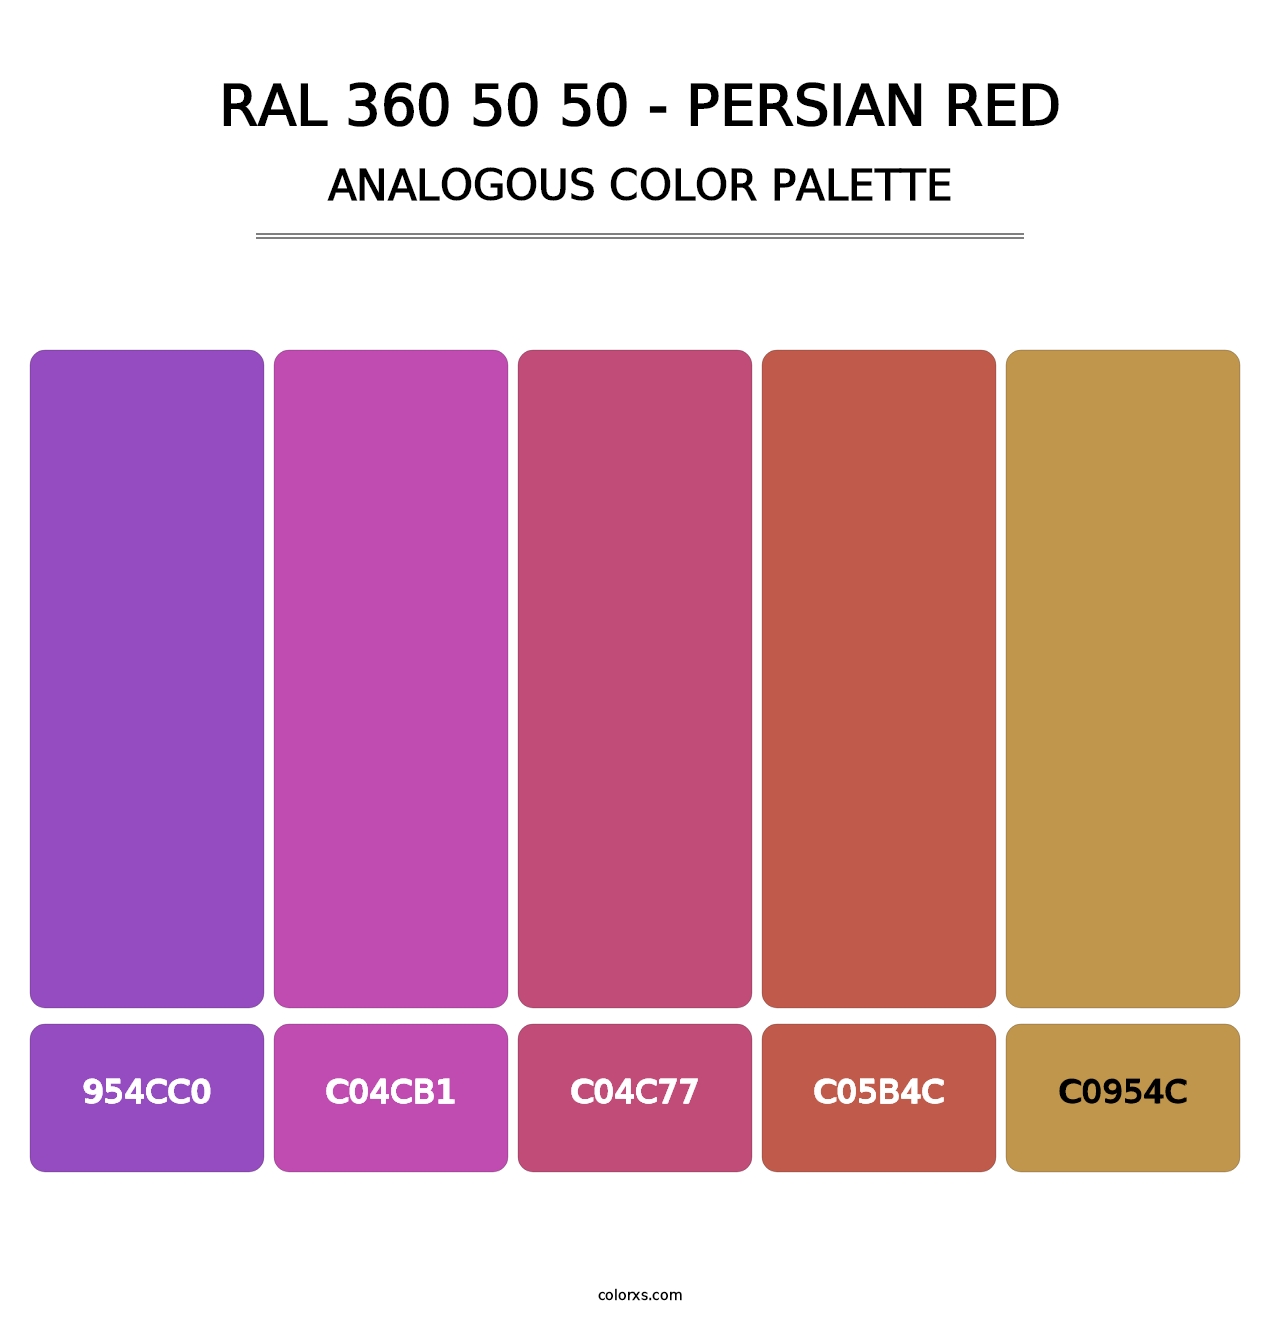 RAL 360 50 50 - Persian Red - Analogous Color Palette